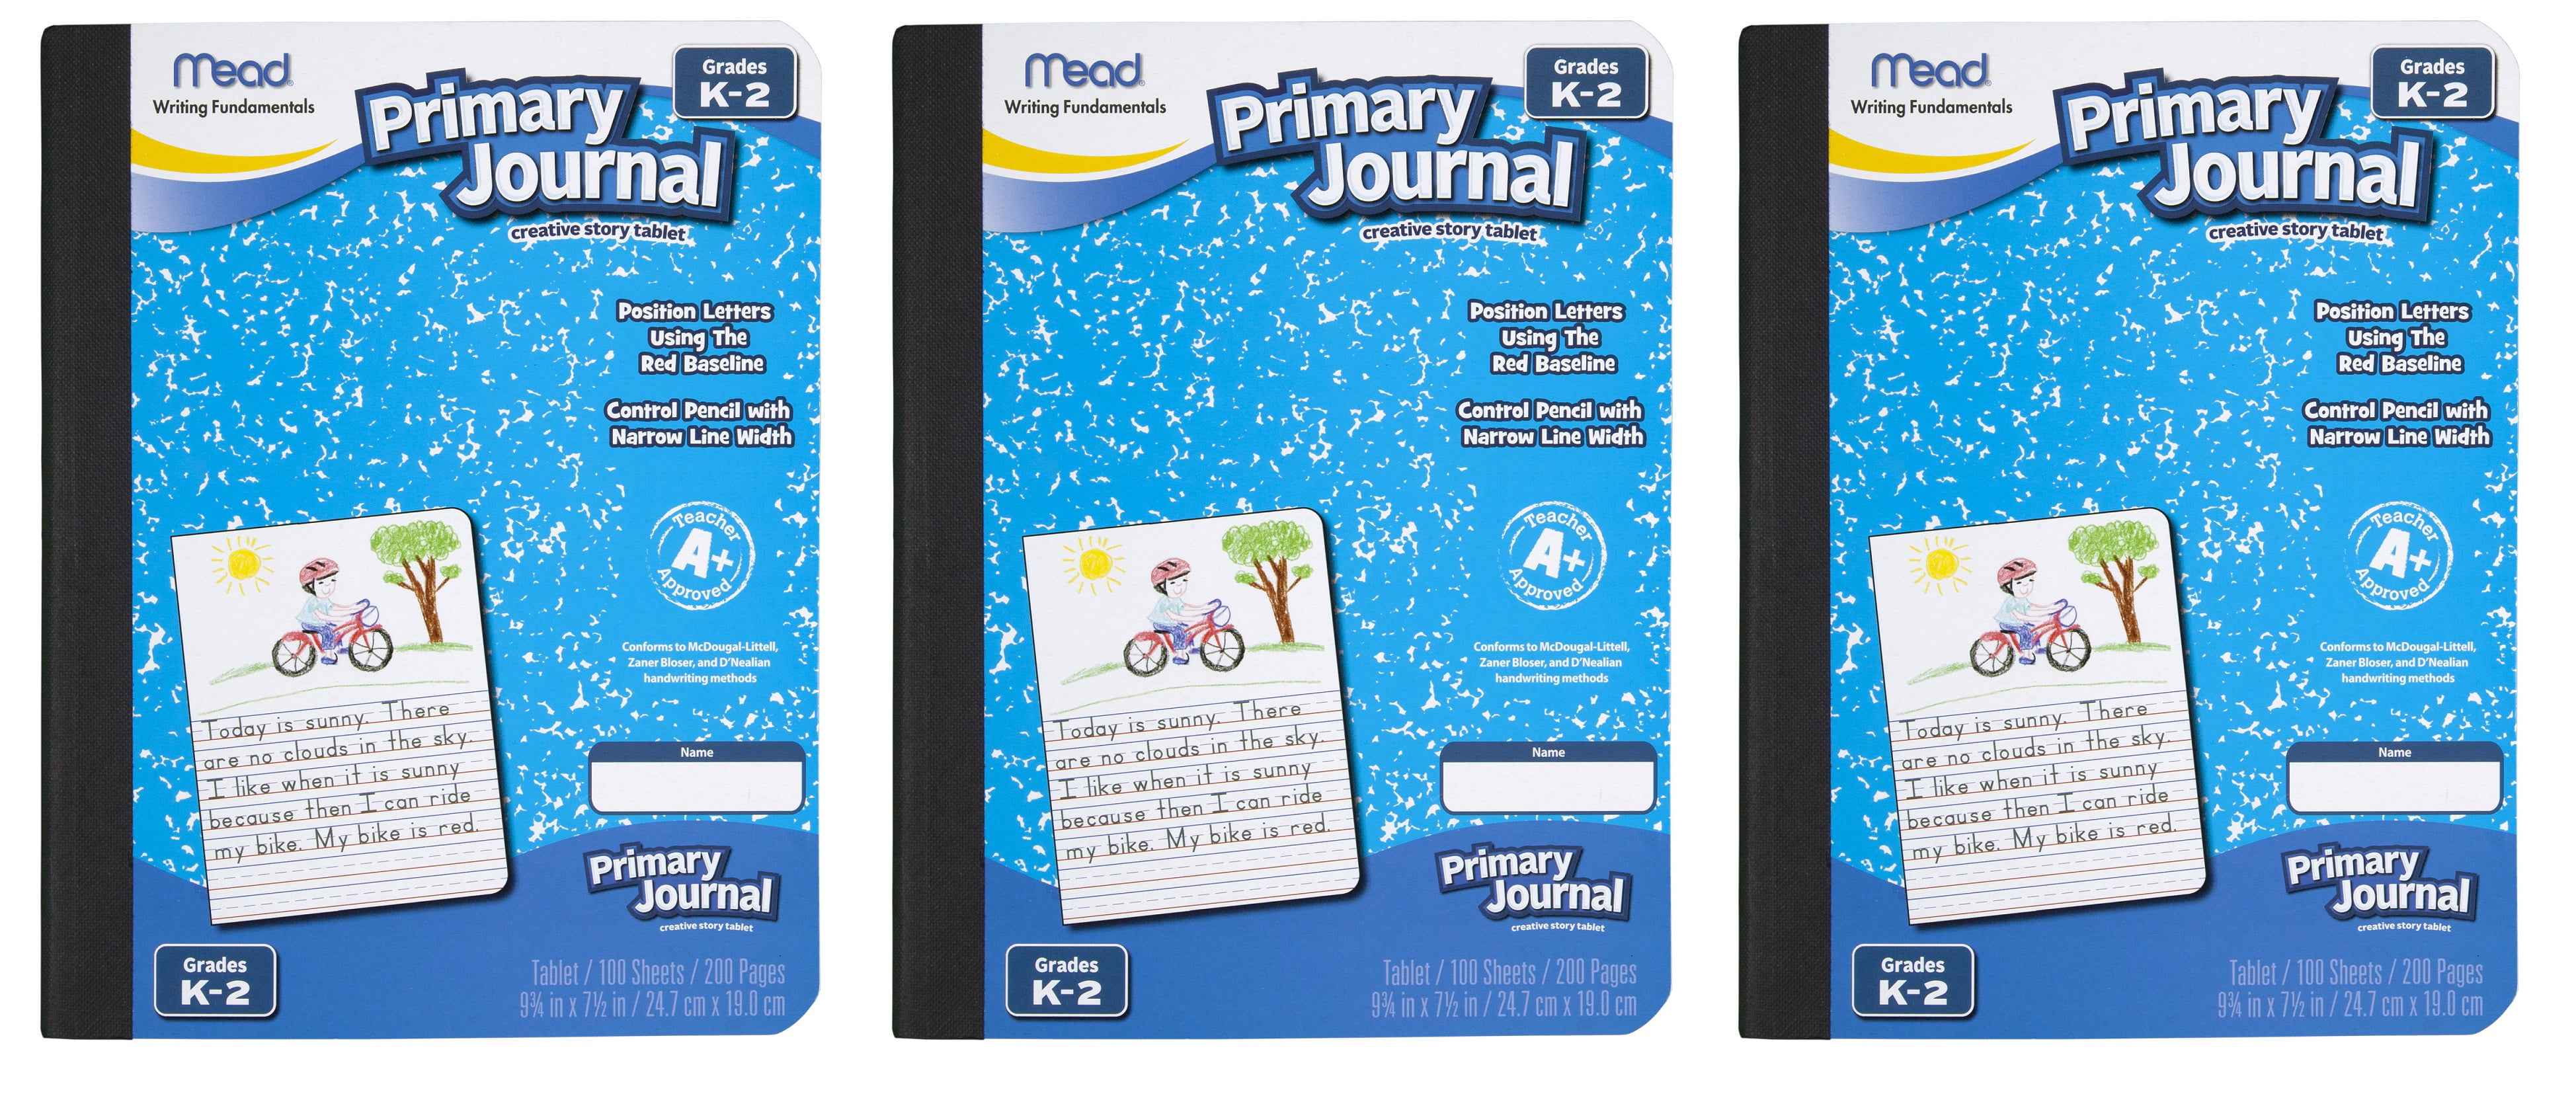 Mead Primary Journal K-2